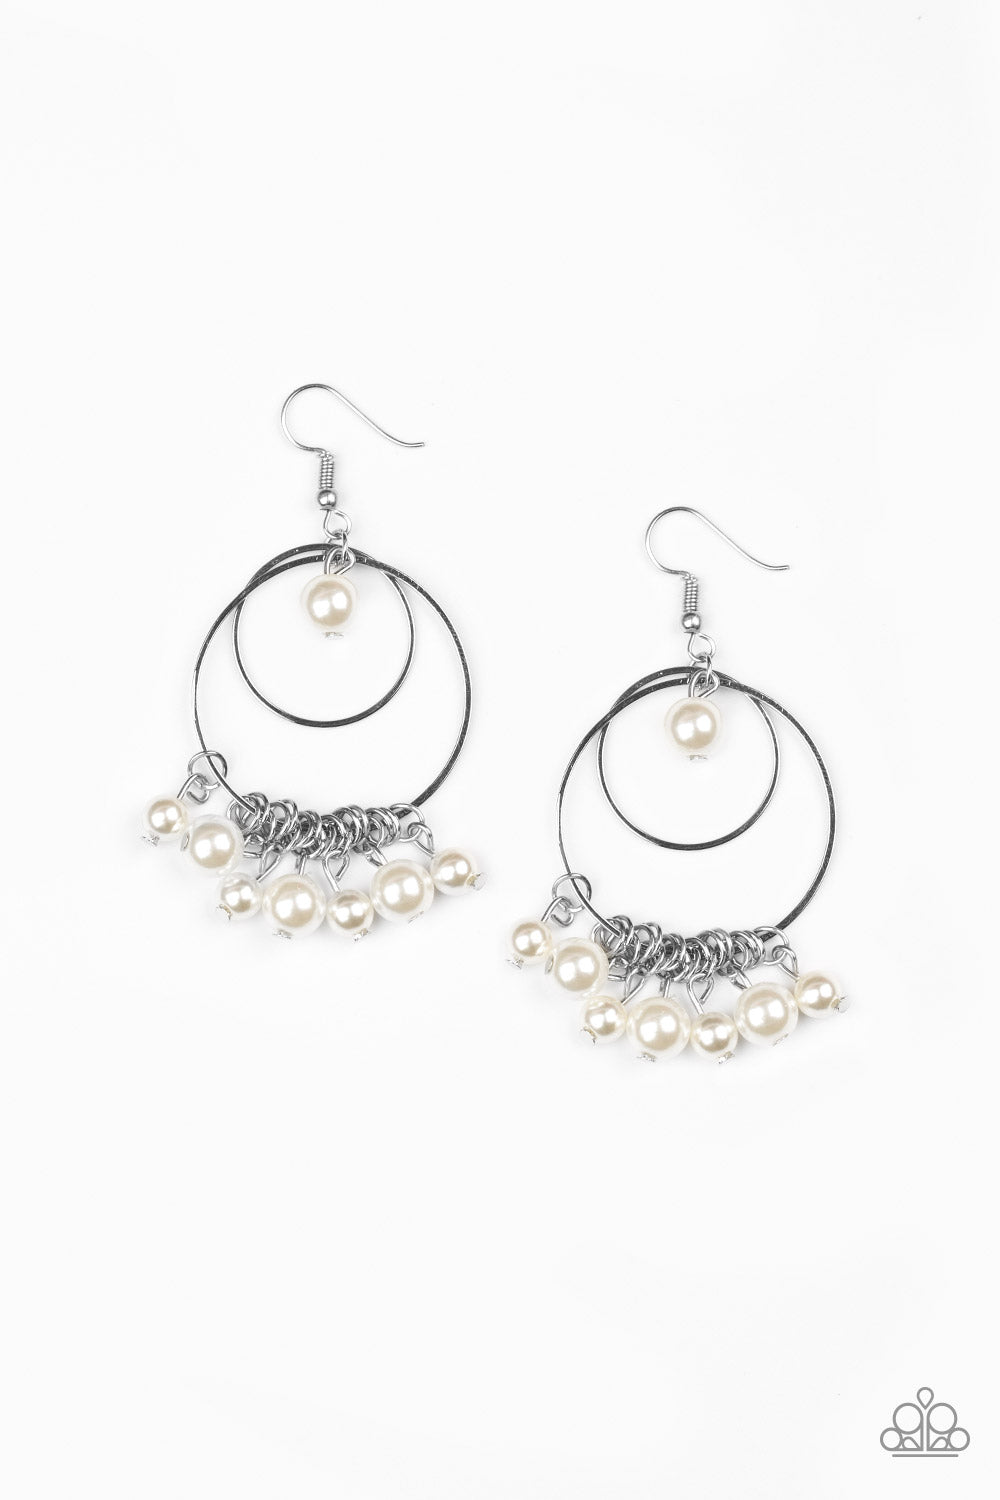 Paparazzi Accessories - New York Attraction - White Earrings